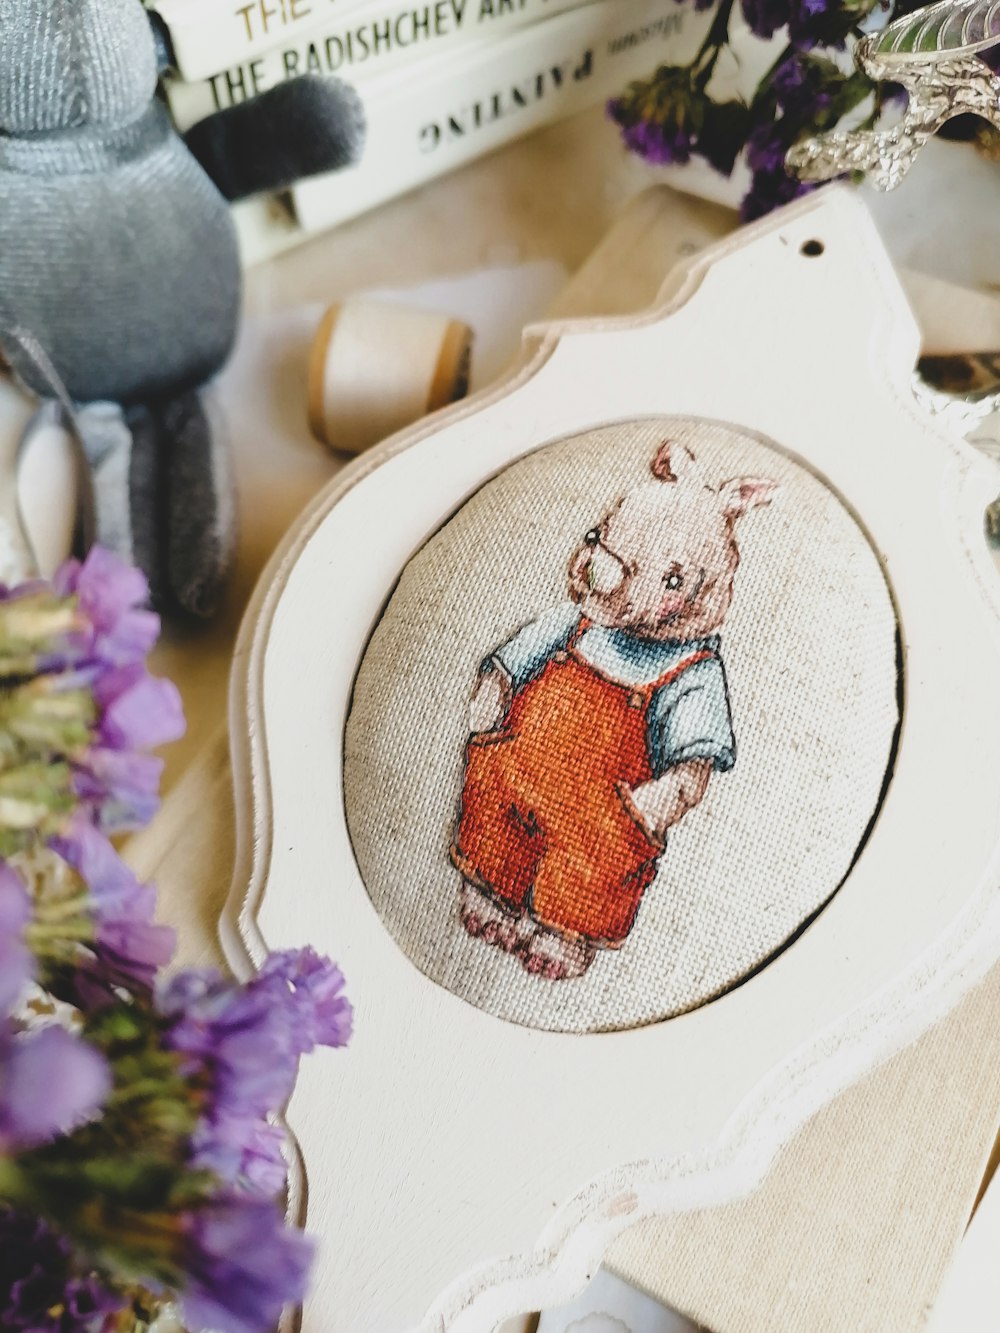 a cross stitch picture of a teddy bear